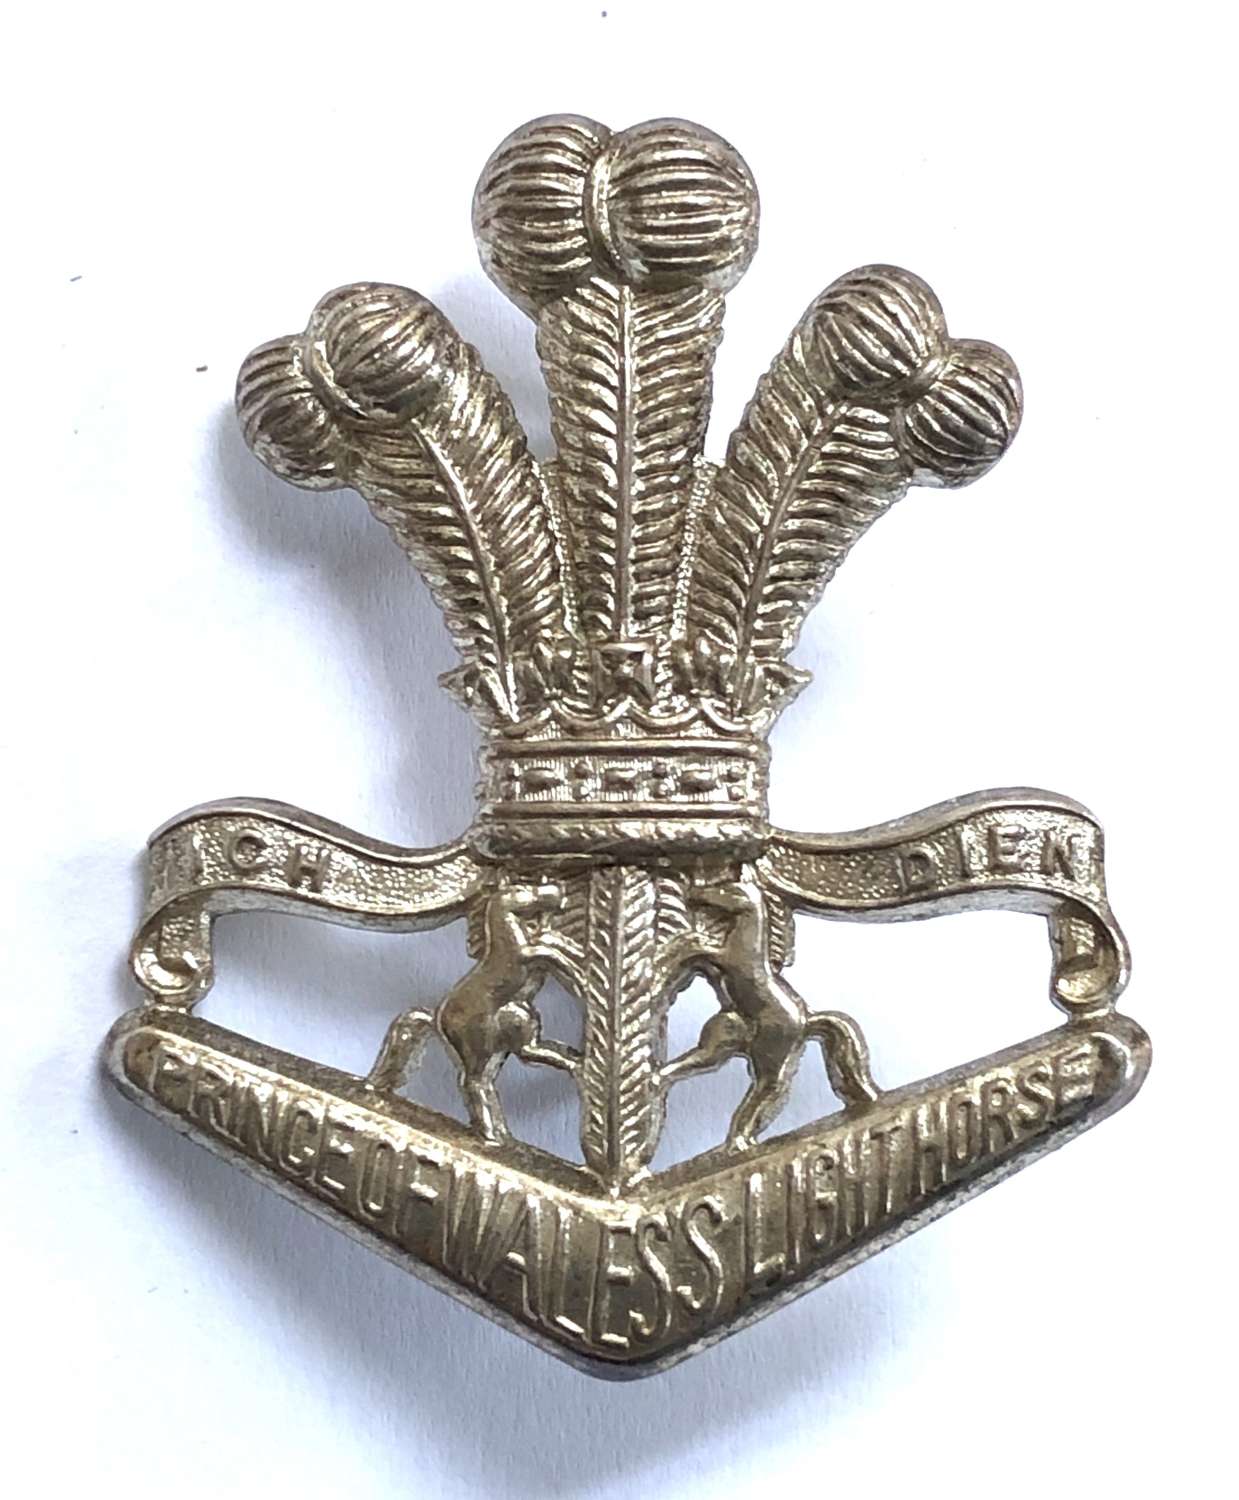 Australia. Prince of Wales's Light Horse slouch hat badge